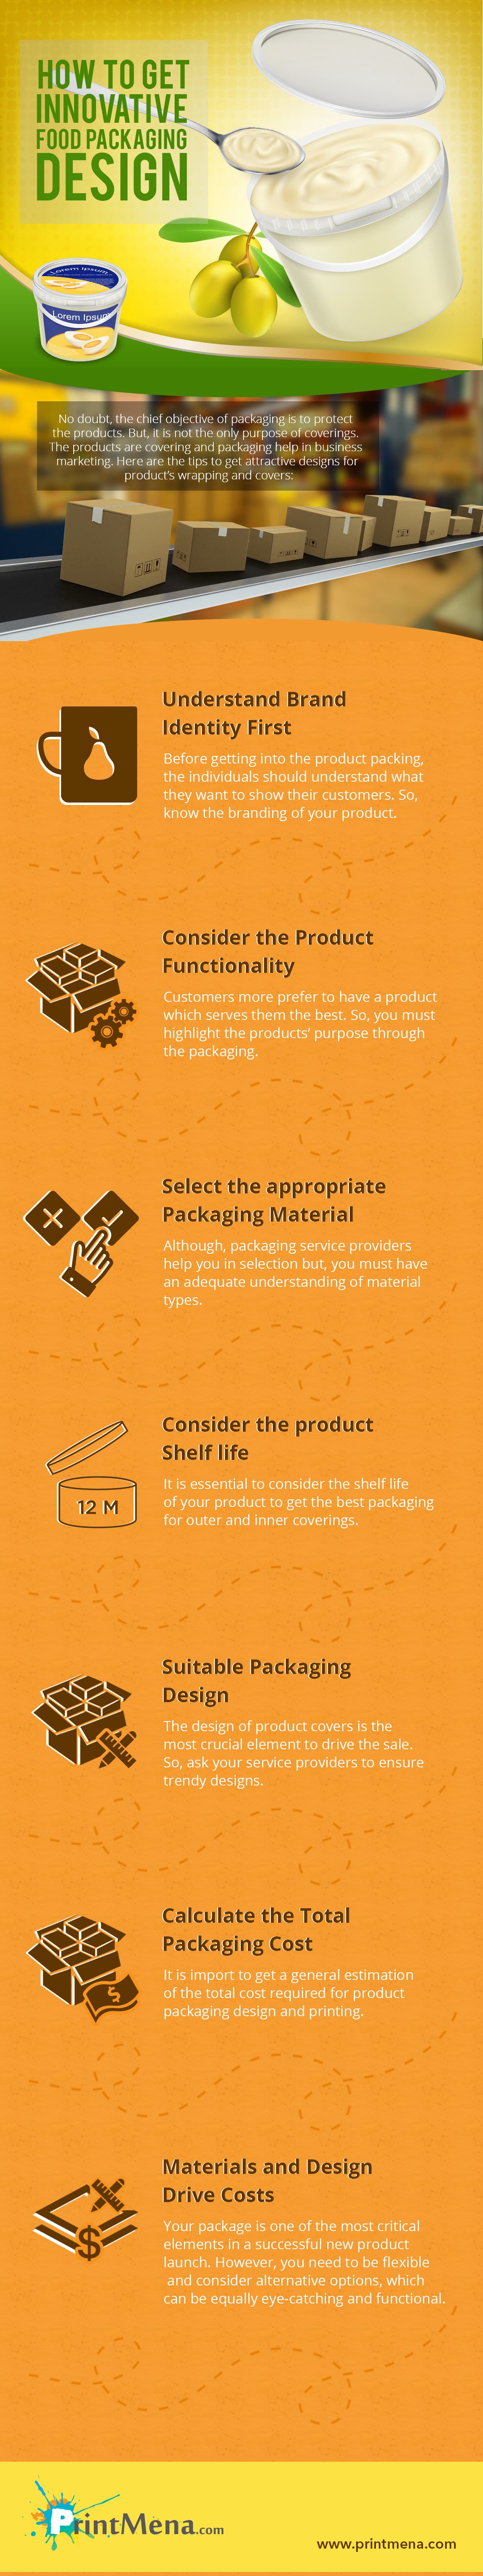 Here is How To Get Innovative Food Packaging Design for your Product